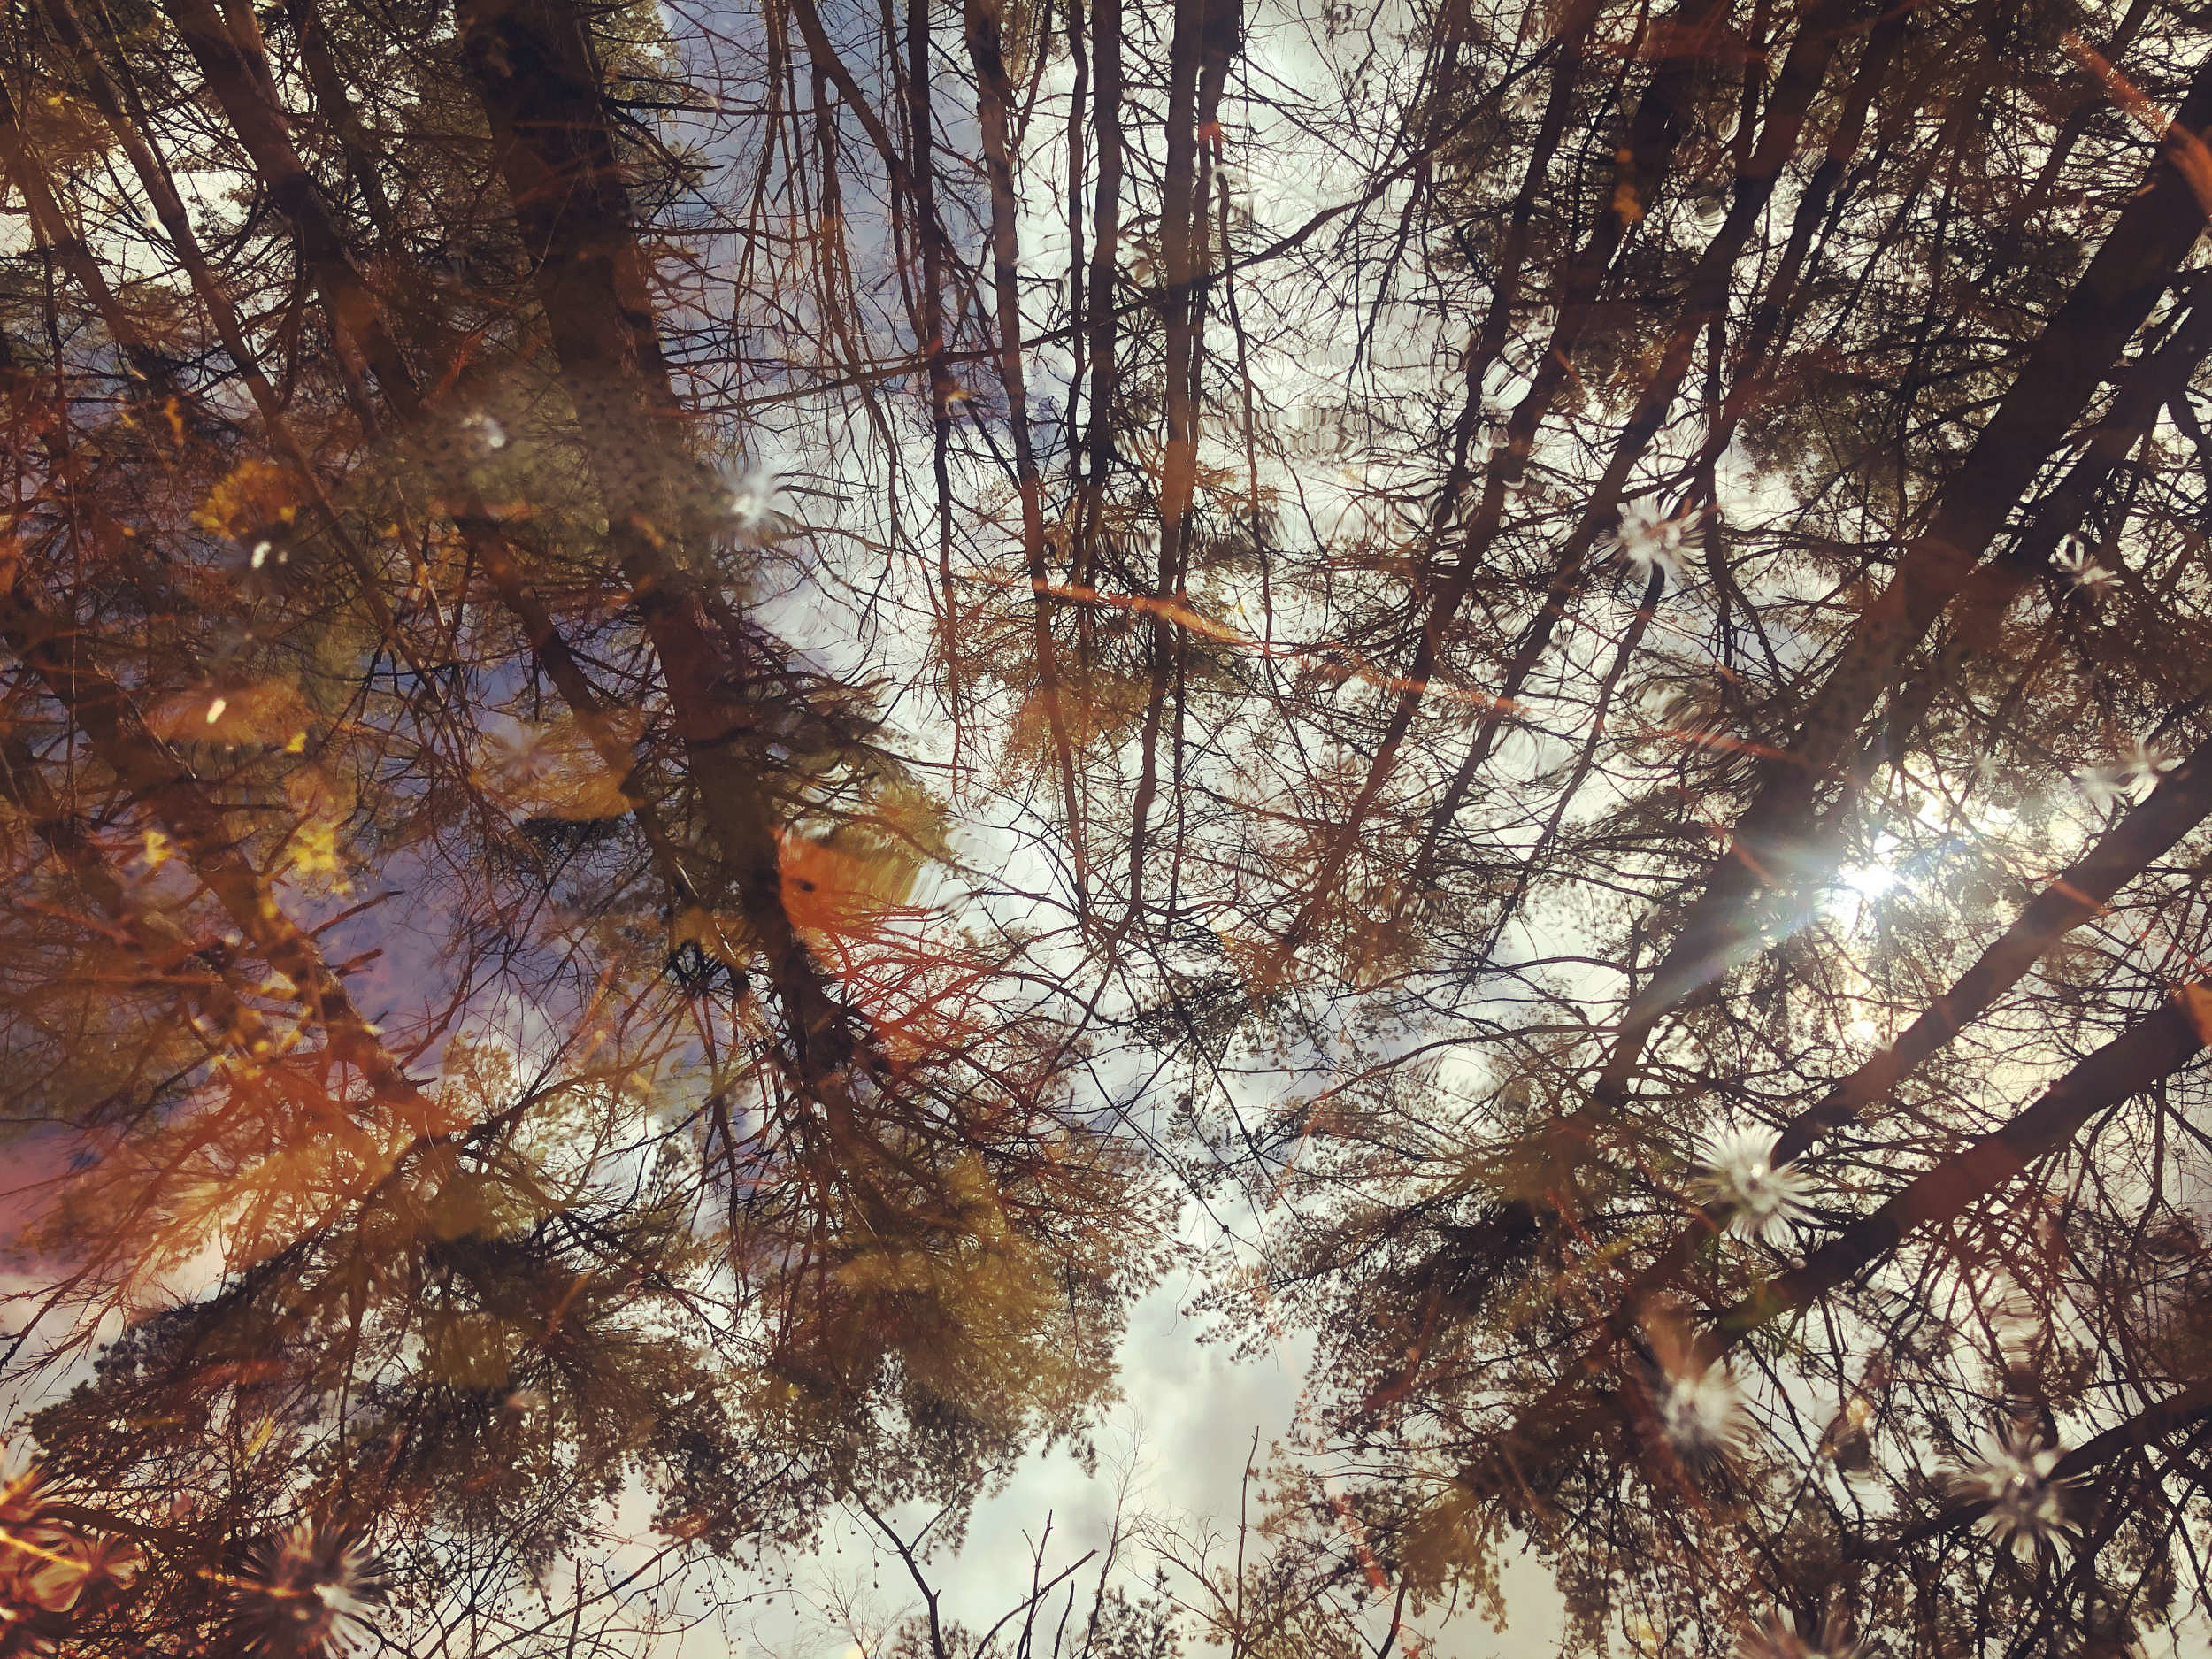 Trees reflected in the still water of a calm vernal pool. (photo © Brett Amy Thelen)